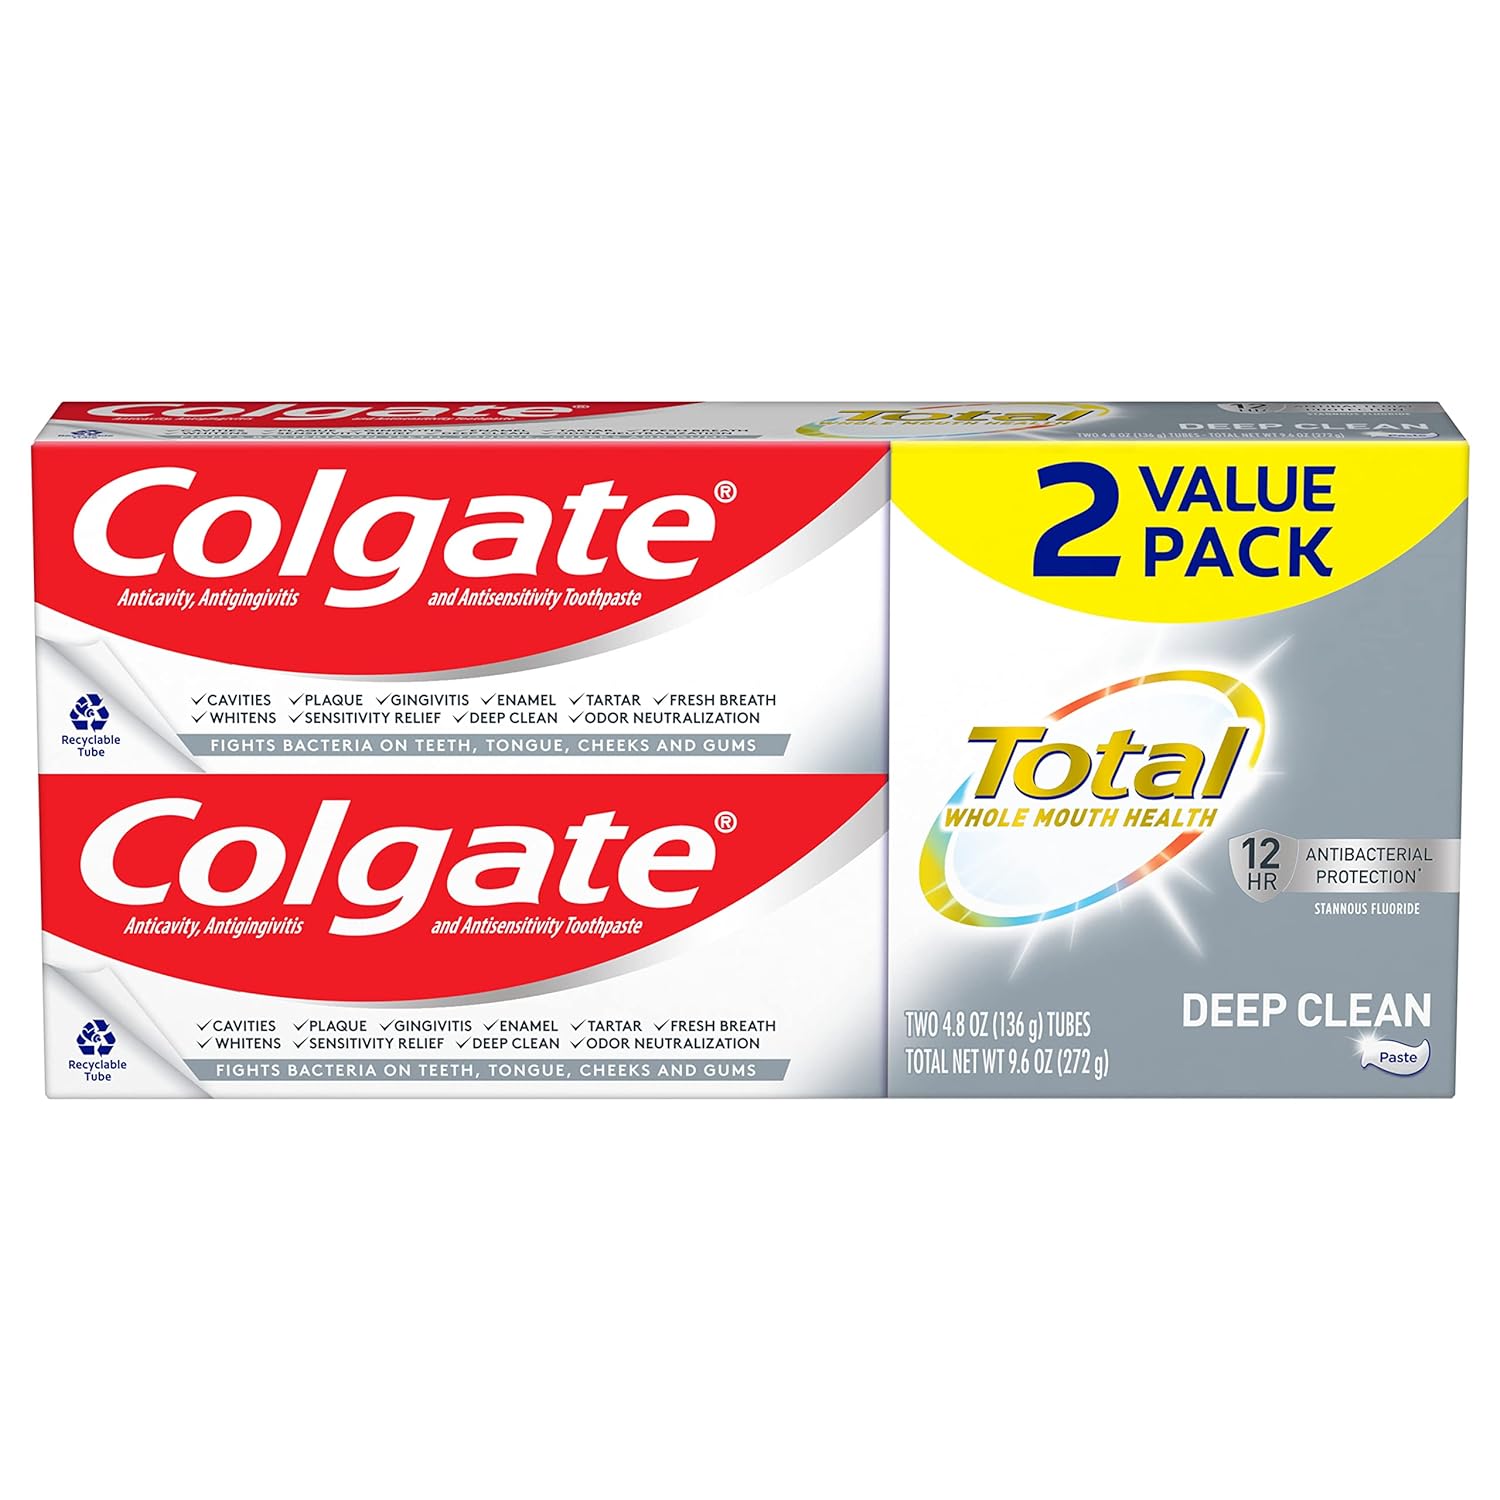 Colgate Total Toothpaste with Stannous Fluoride and Zinc, Multi Benefit Toothpaste with Sensitivity Relief and Cavity Protection, Deep Clean - 4.8 Ounce (Pack of 2)